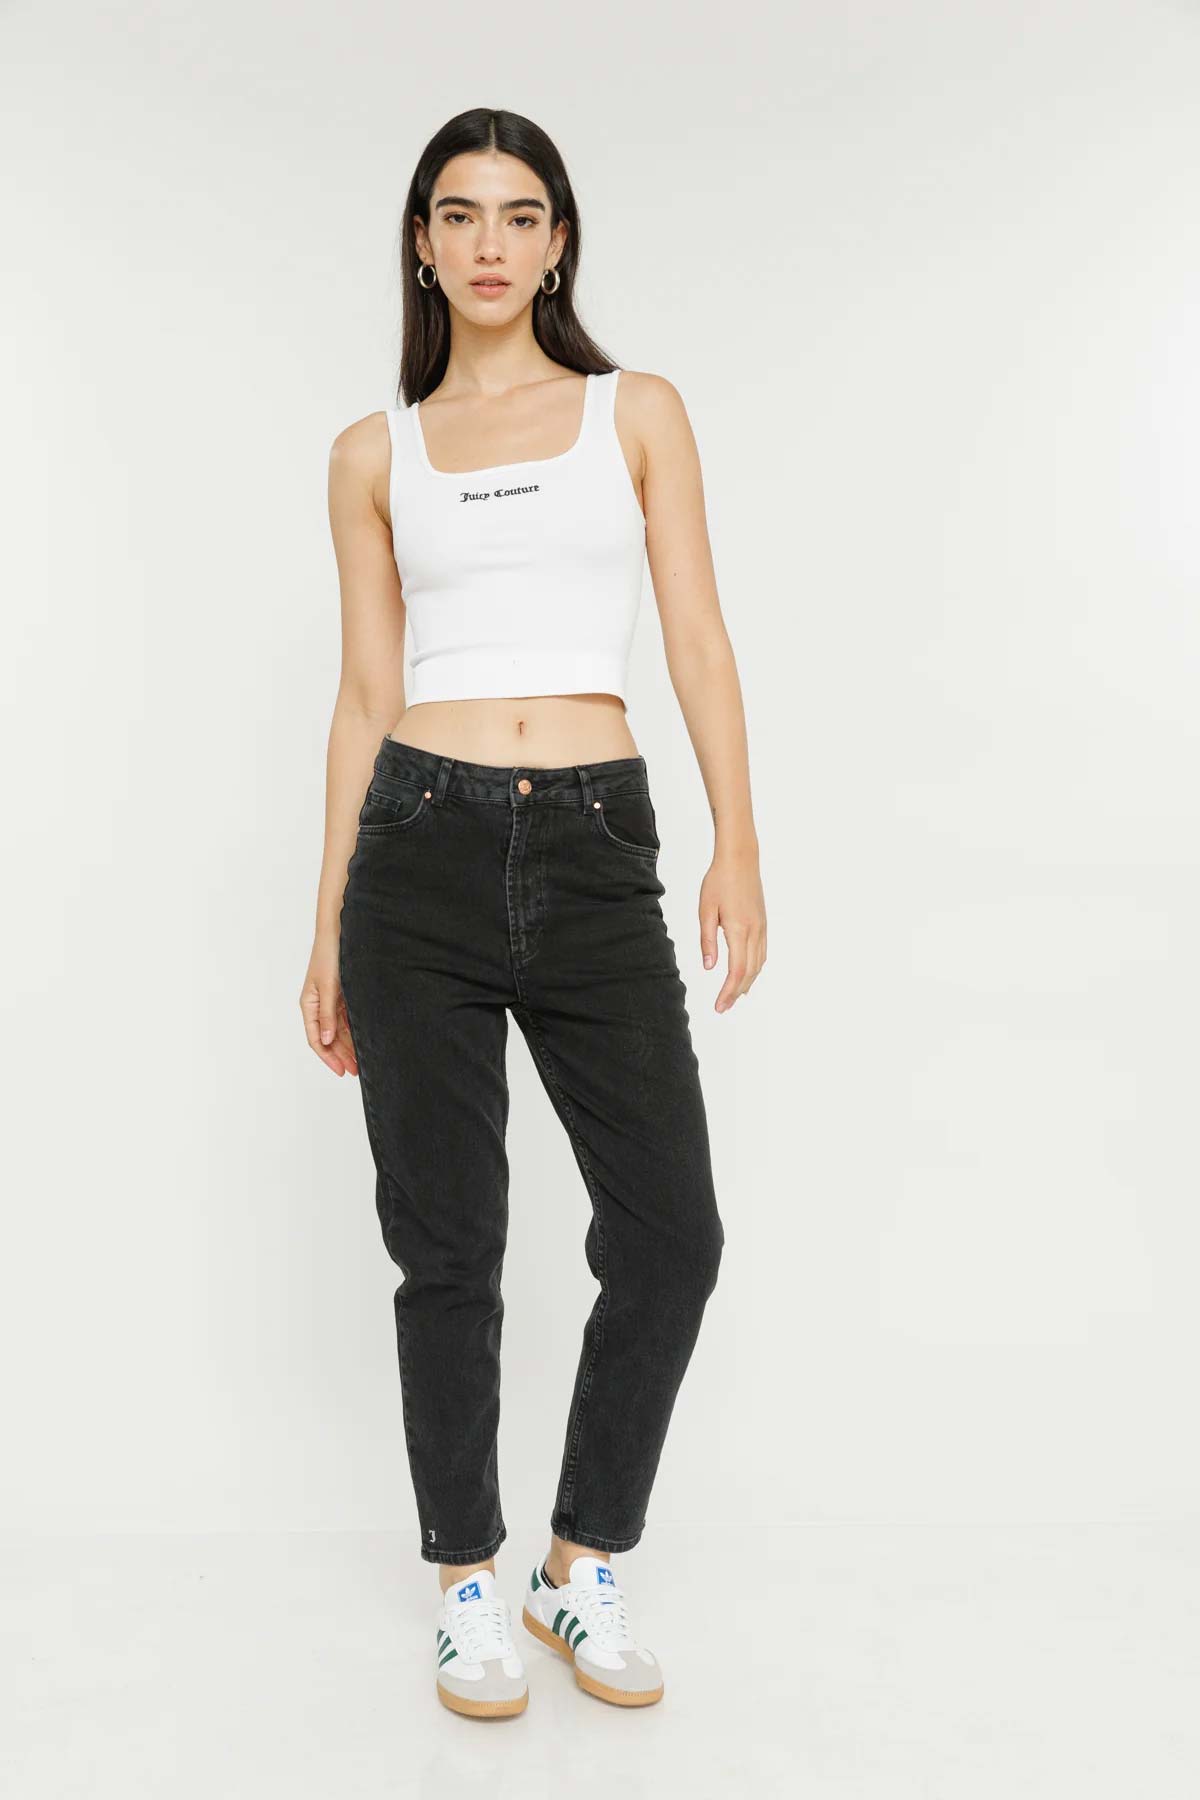 Juicy Couture ג'ינס Skinny בצבע אפור כהה-Juicy Couture-34-נאקו